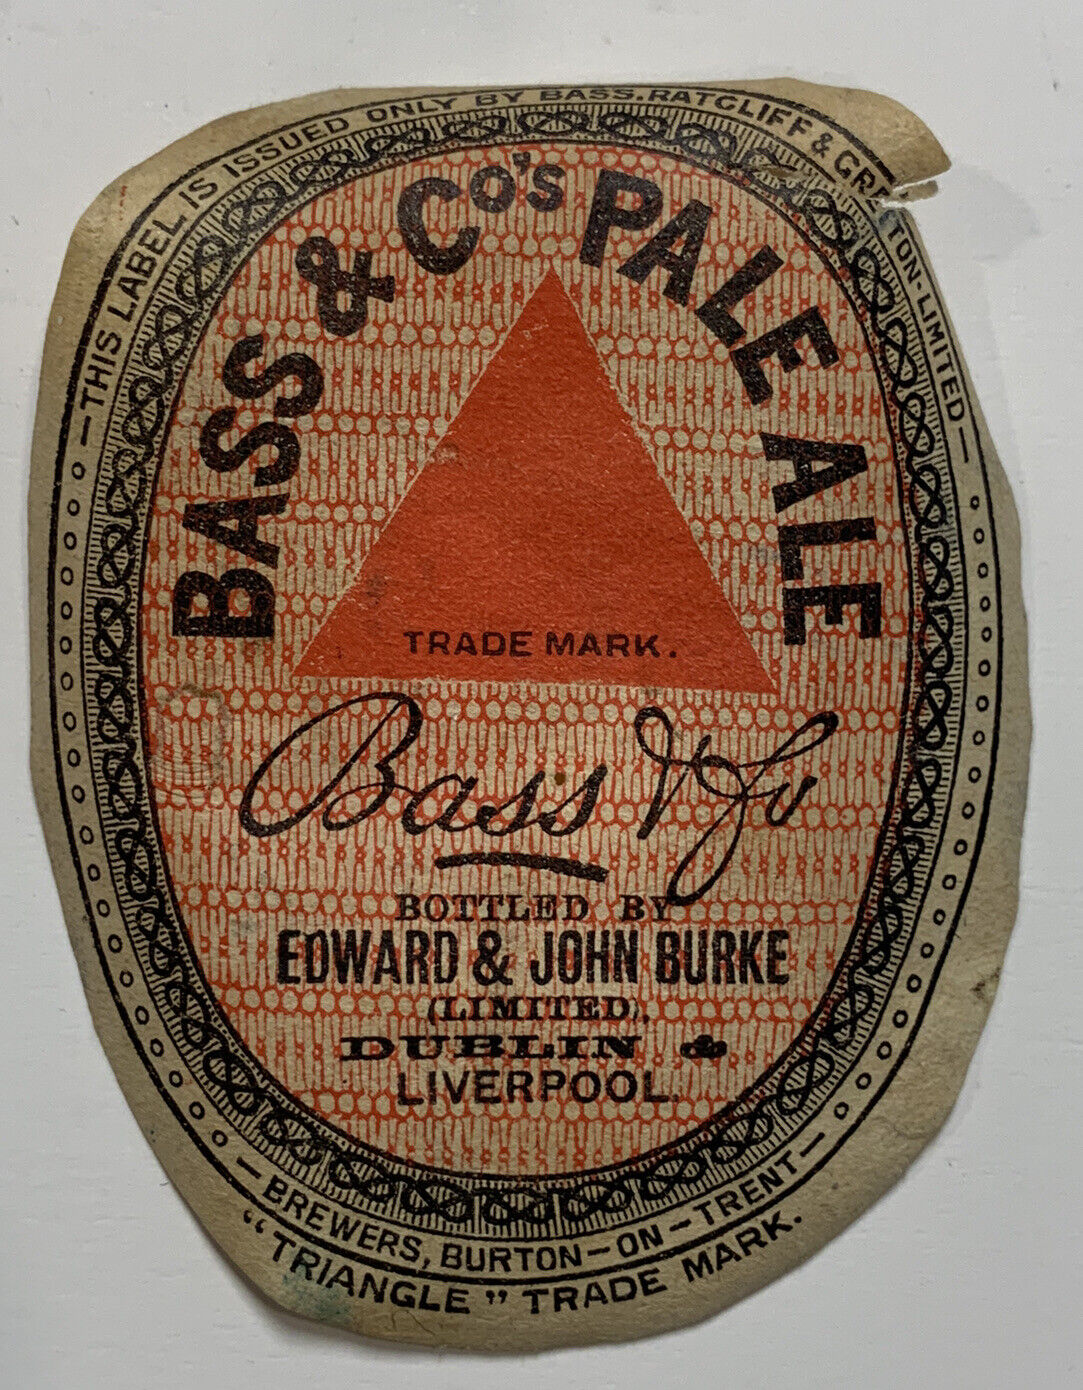 BEER LABEL: 1920s BASS & COs Pale Ale